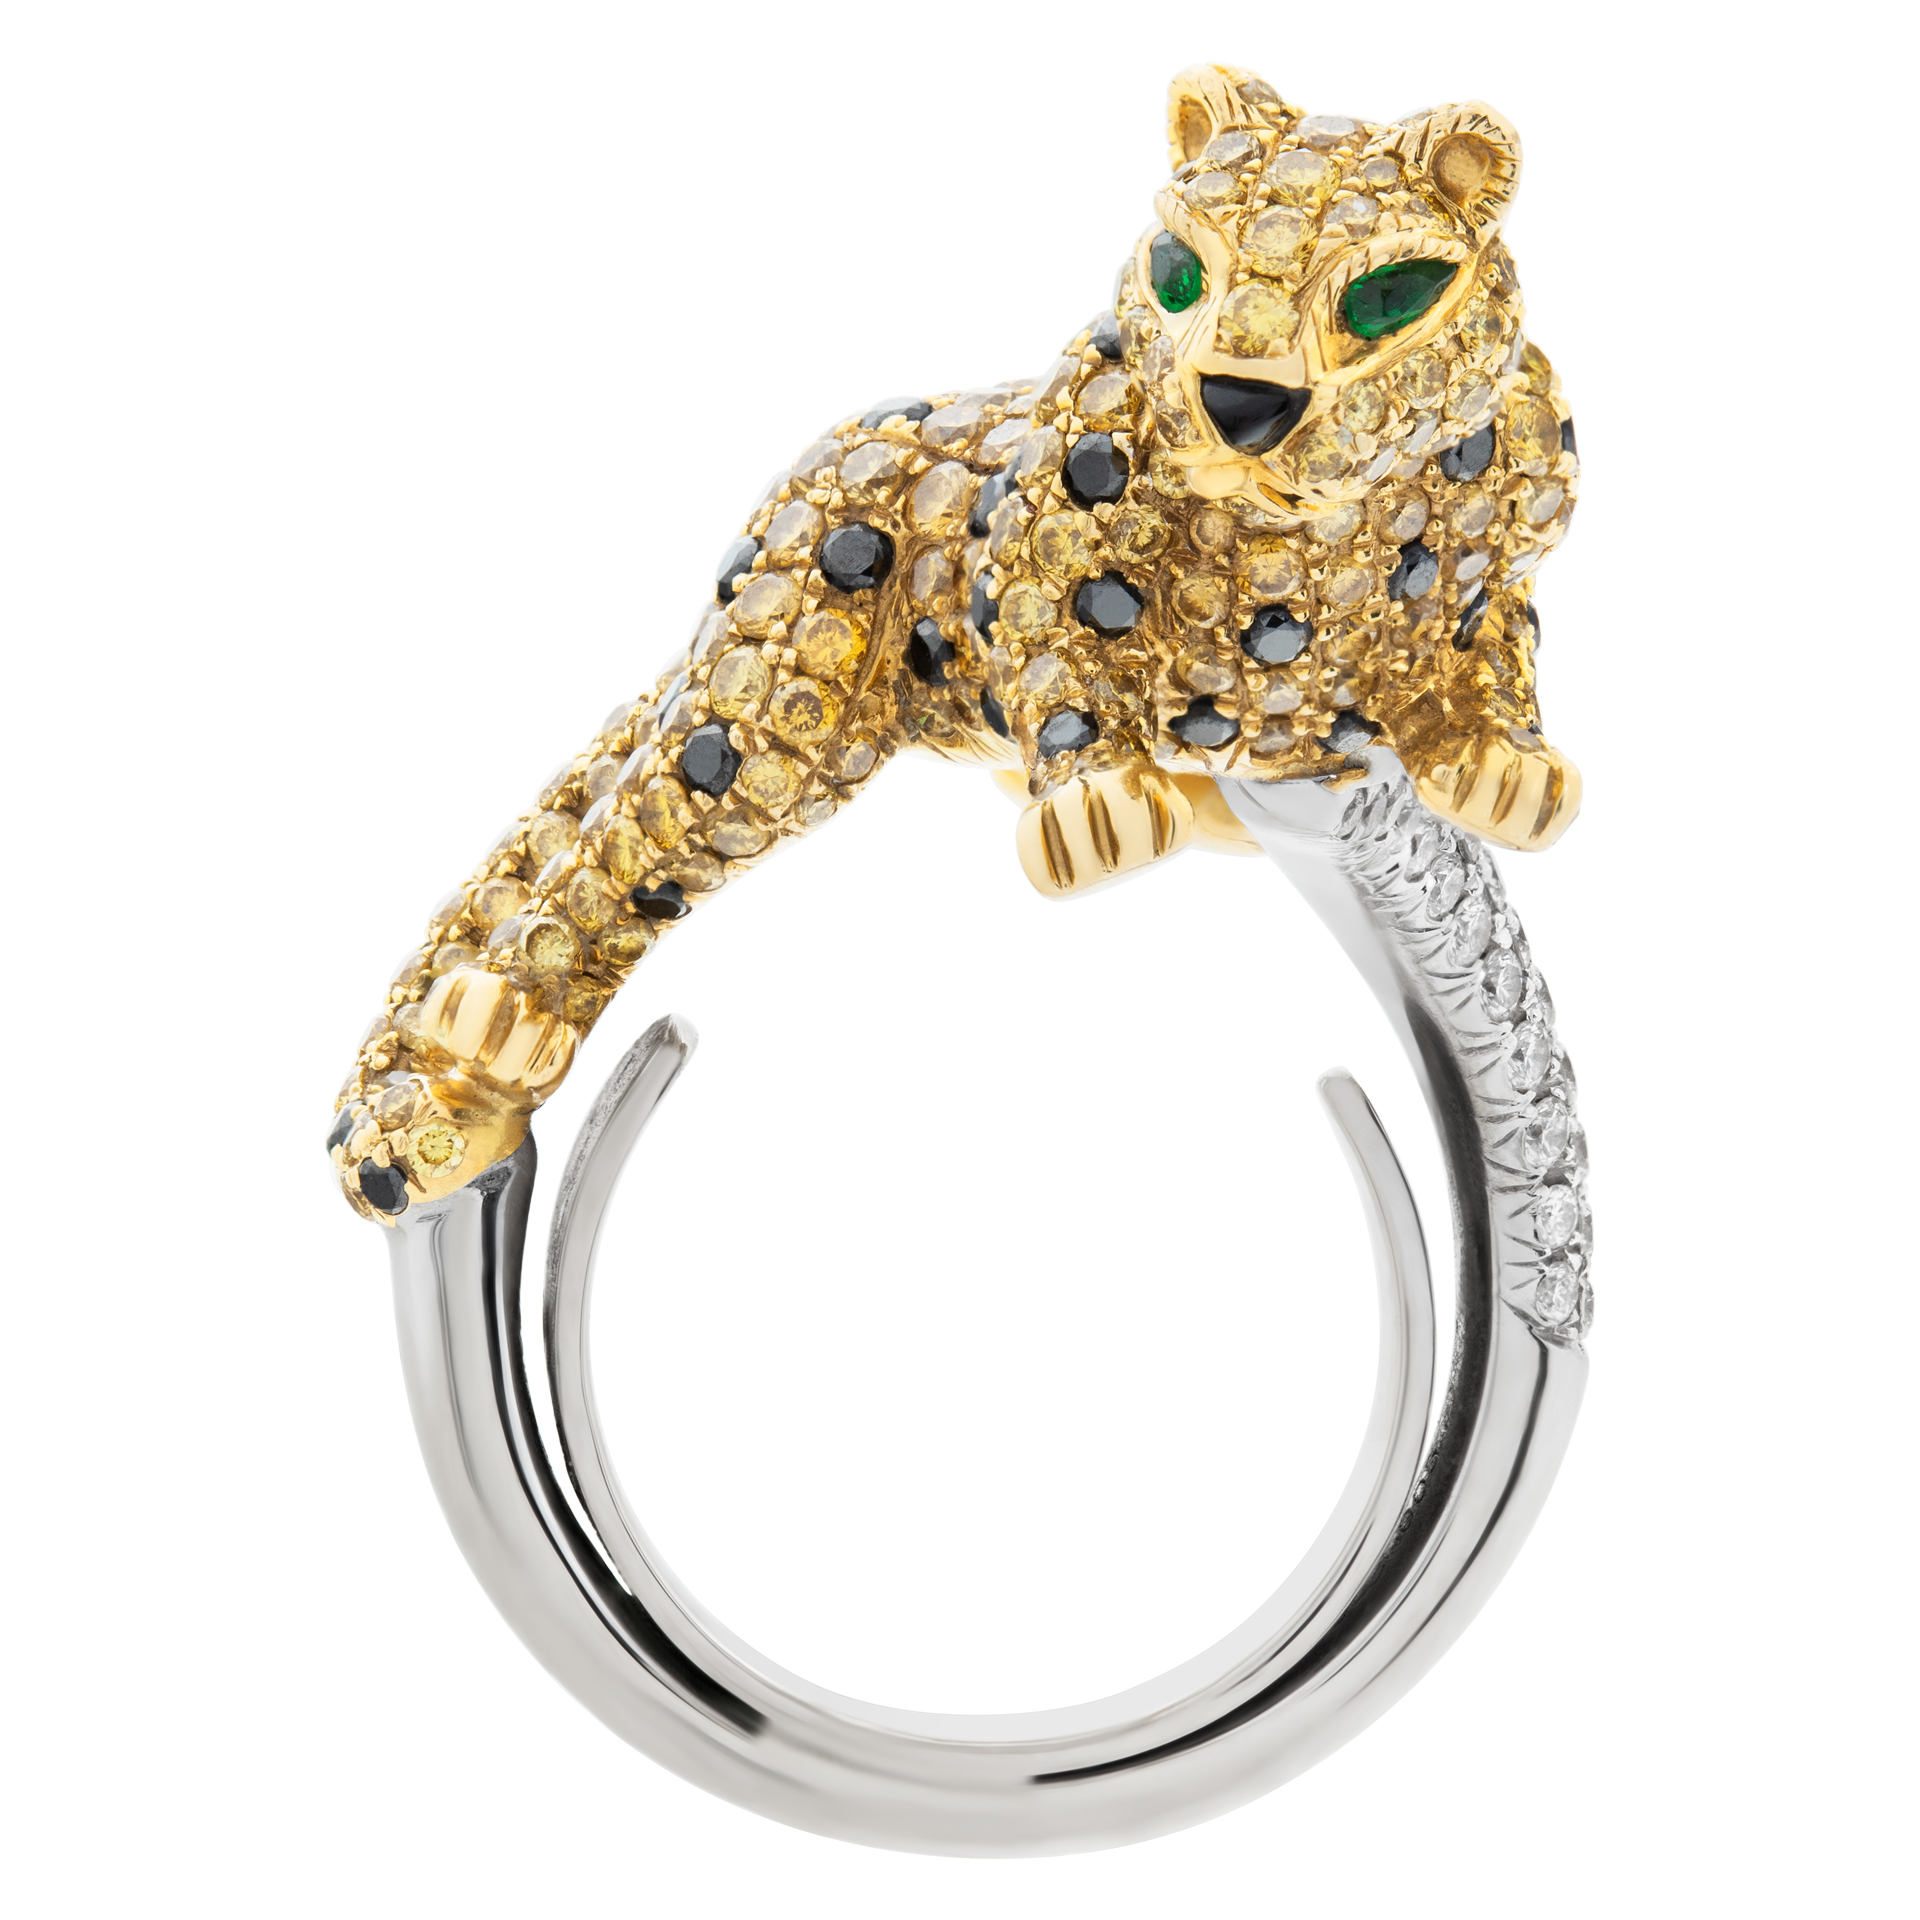 Spotted Leopard ring with white, champagne and black diamonds